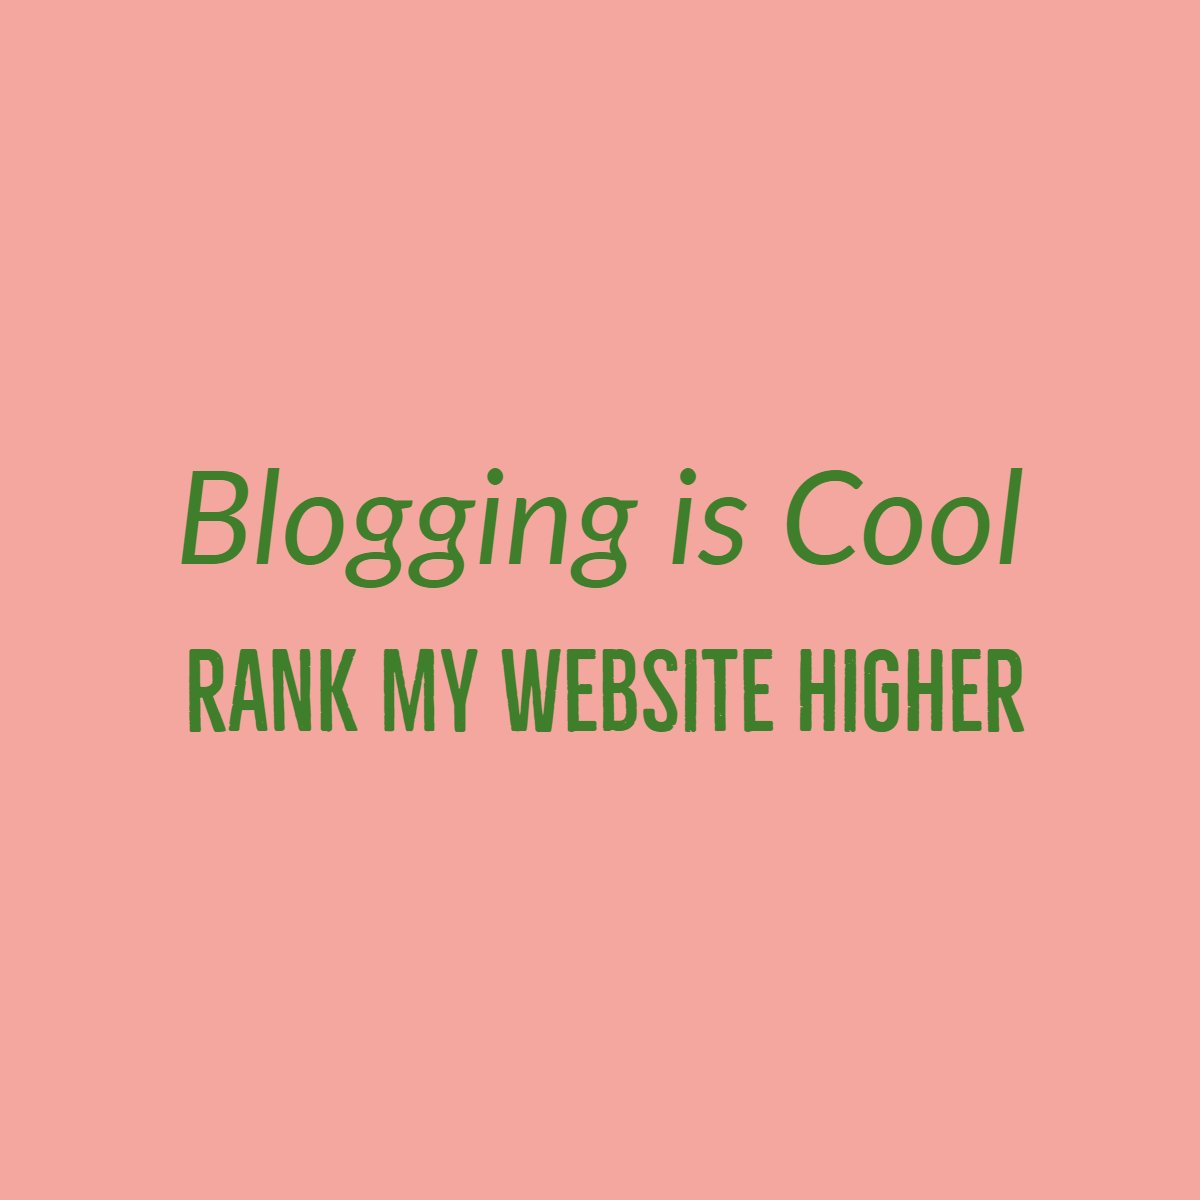 Bloggingiscool.com The Importance of Categories and Tags in Organizing Blog Posts